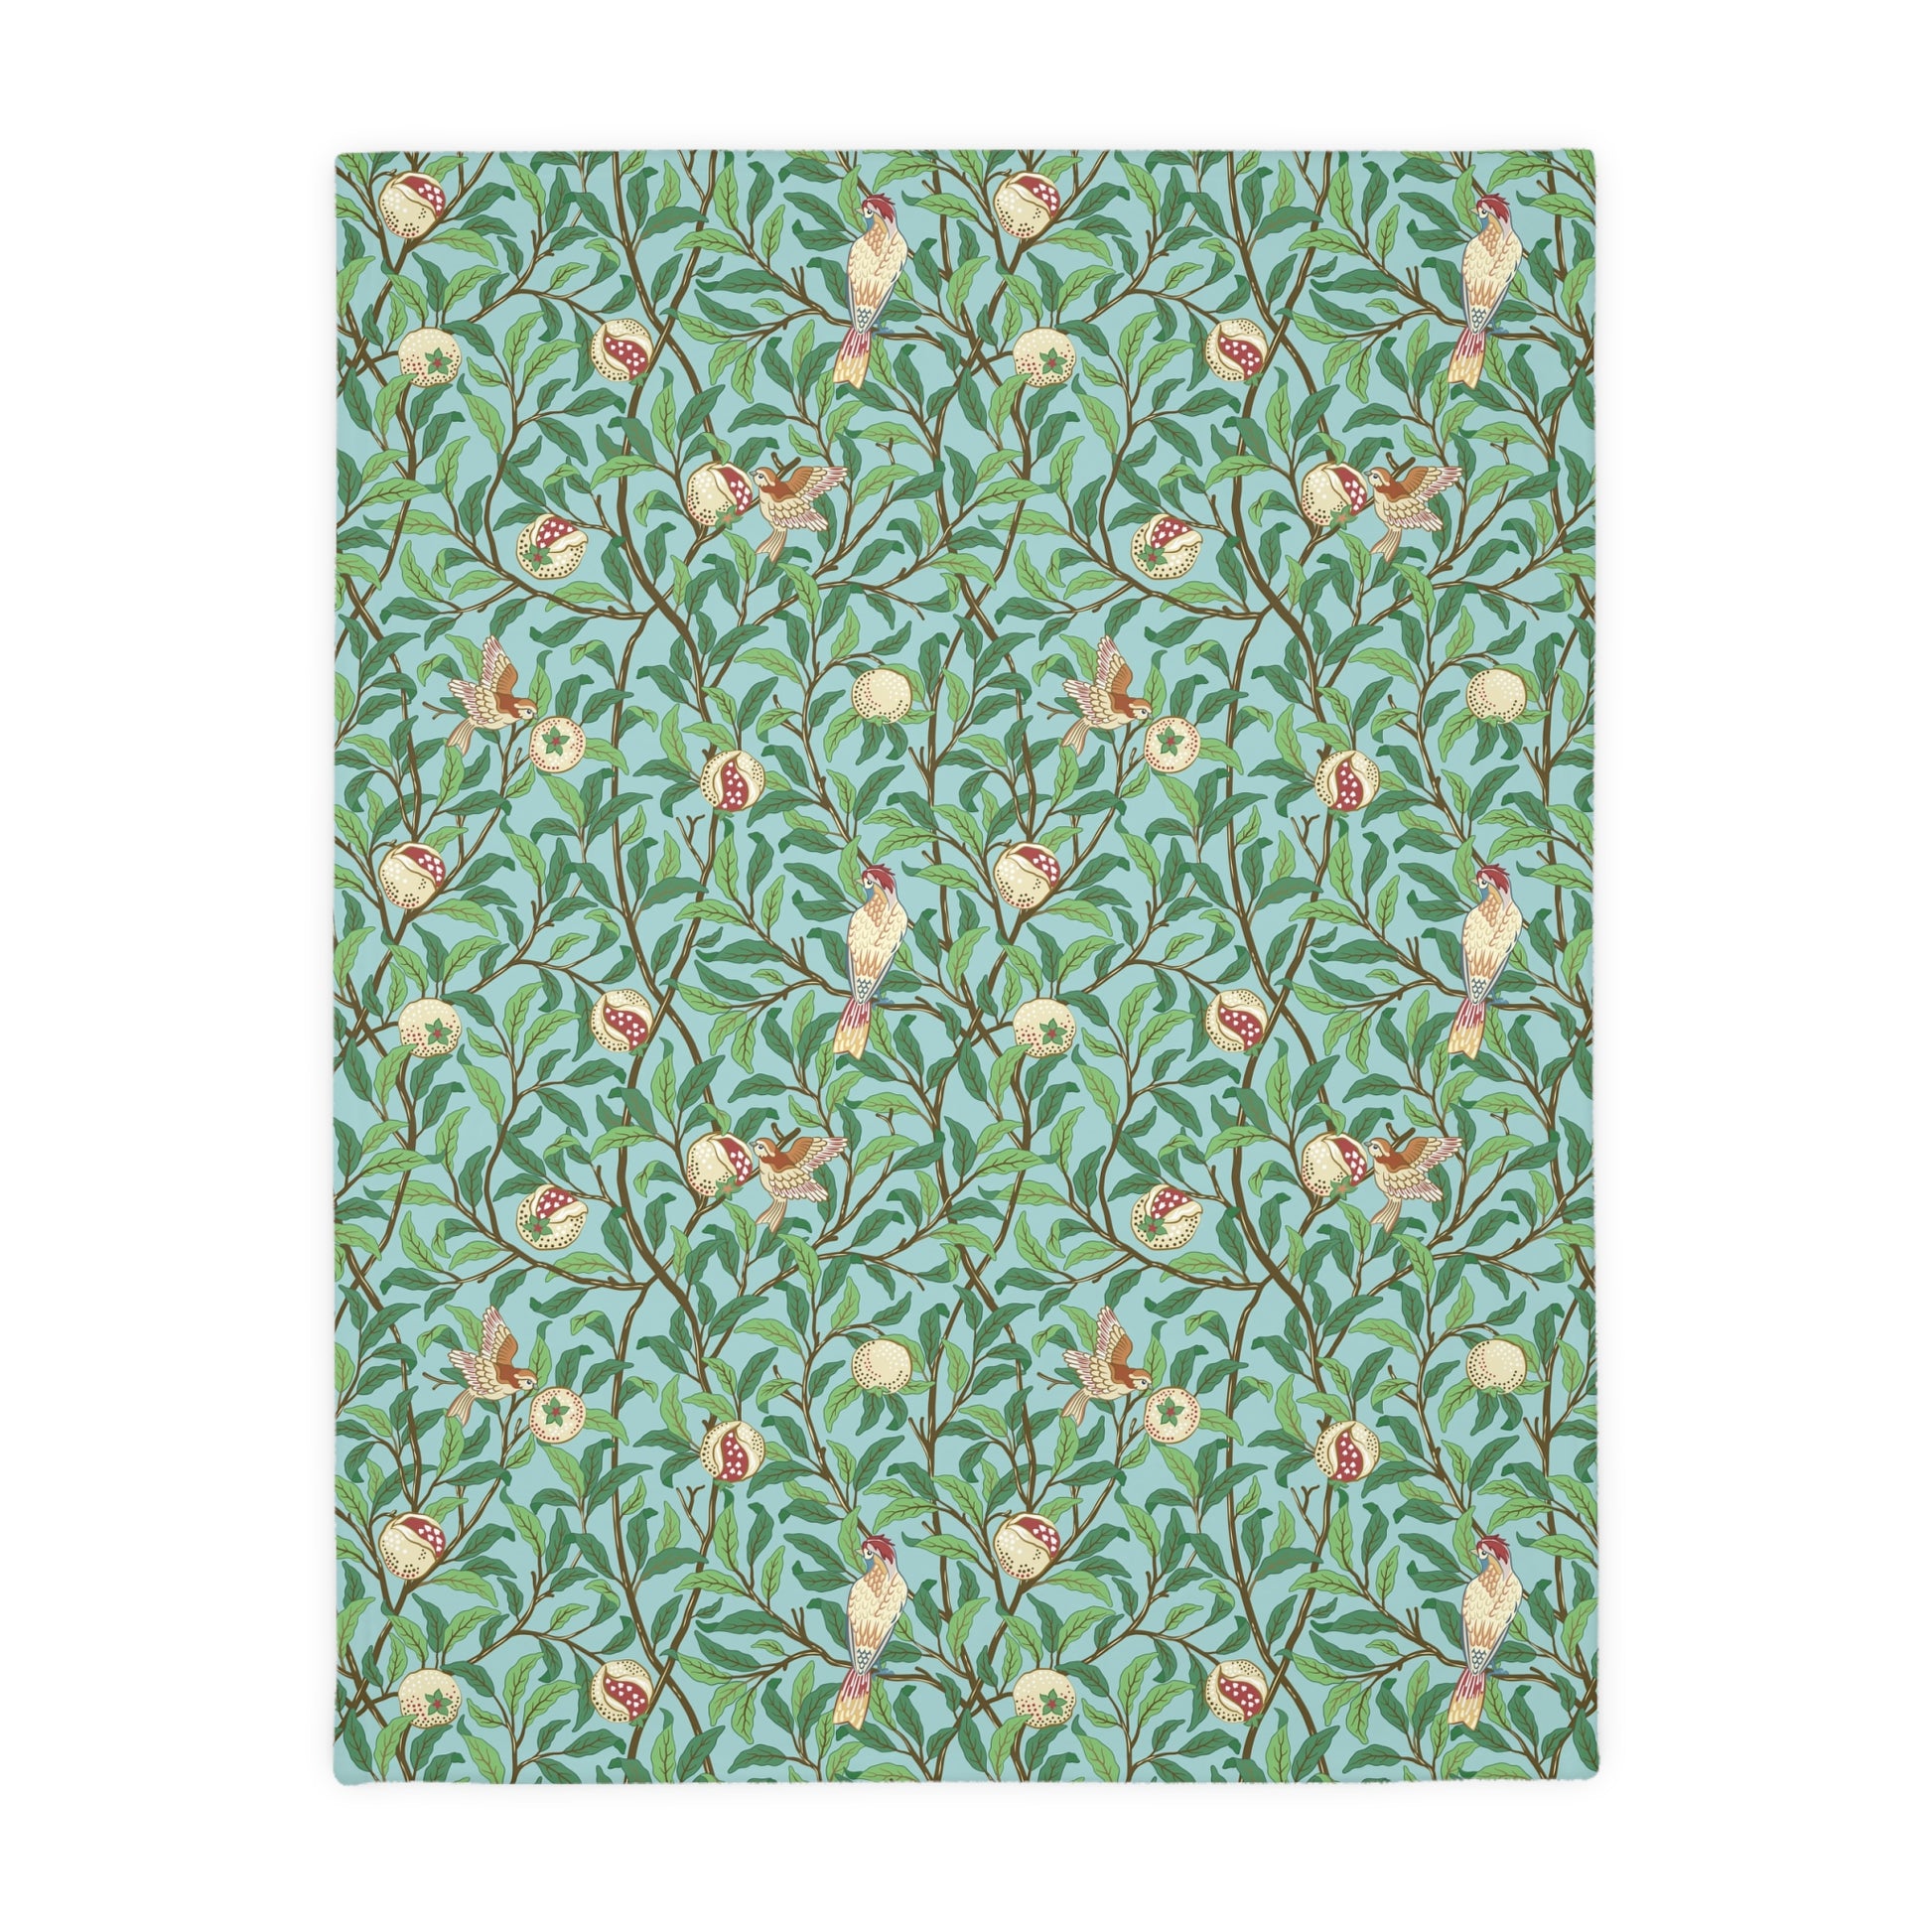 william-morris-co-luxury-velveteen-minky-blanket-two-sided-print-bird-and-pomegranate-collection-tiffany-blue-onyx-6